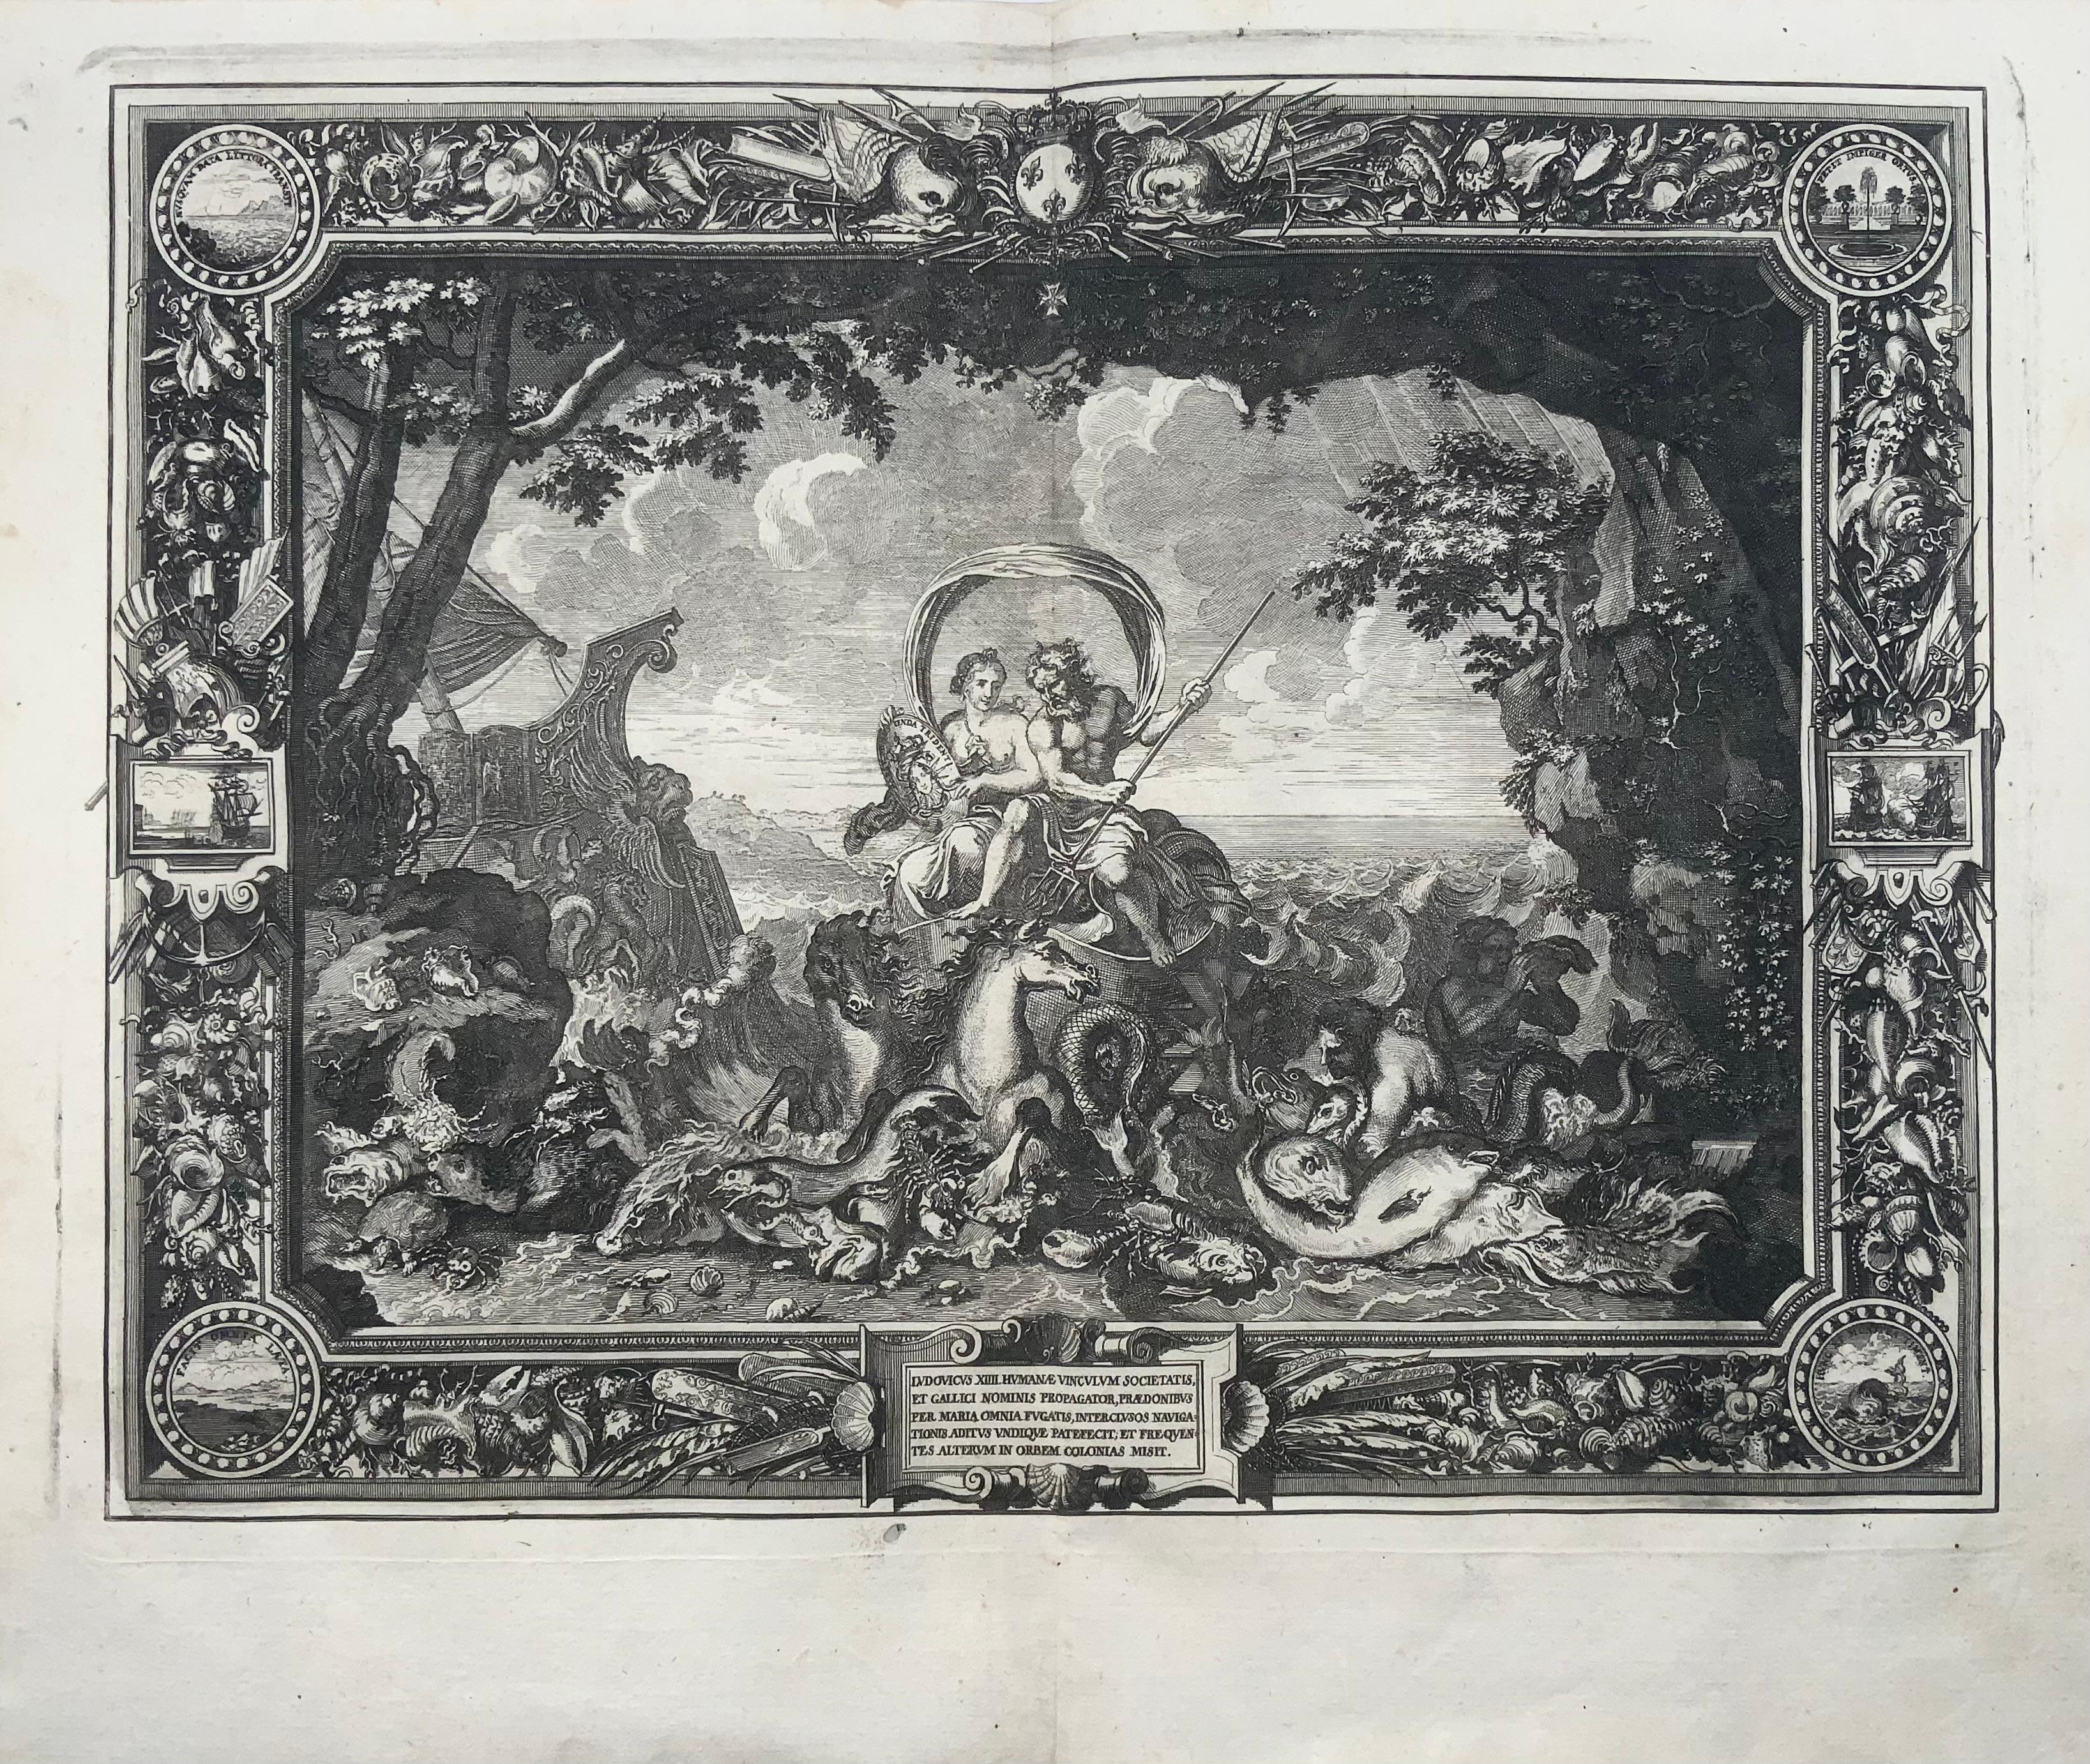 Represents the element of water depicting Neptune and Thetis on a chariot drawn by sea horses.

Etching with engraving made by Sébastien Leclerc in 1679, after tapestries by Charles Le Brun. 

Size: approx. 30.5 x 37 cm. 

Sébastien Leclerc